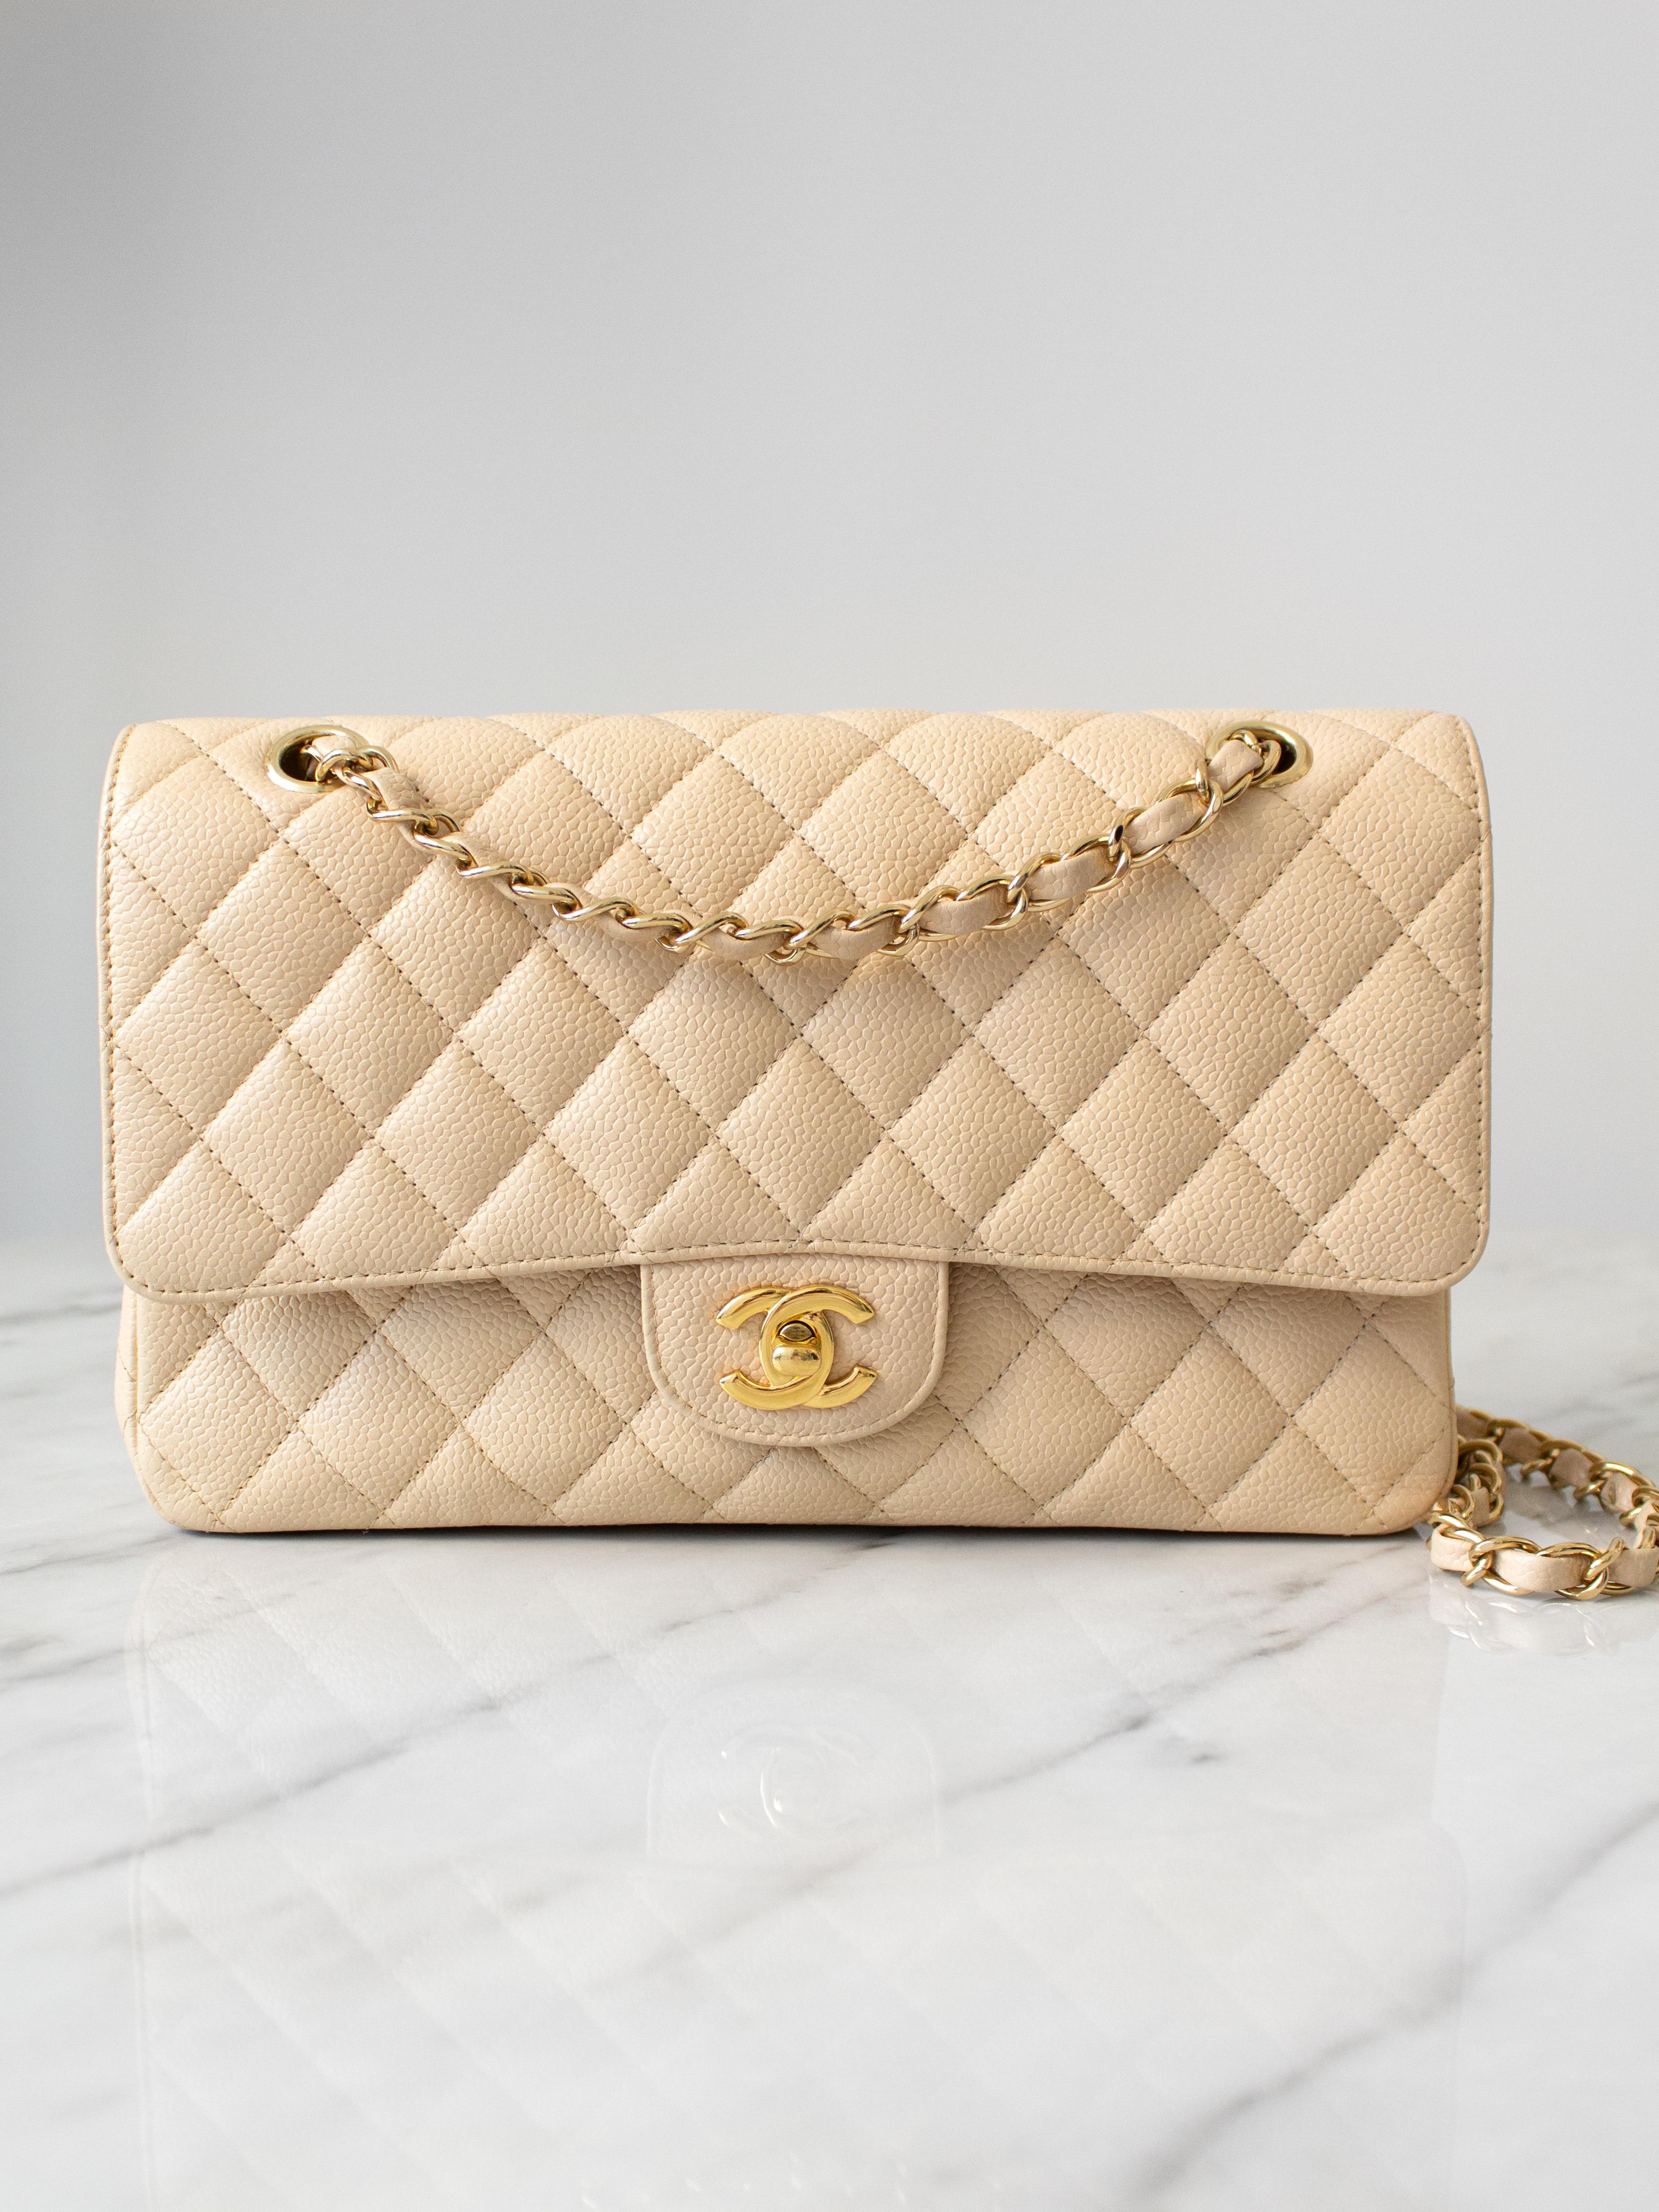 Presenting a highly coveted bag: Chanel Double Flap in Beige Clair – a neutral beige shade with a touch of ivory that's really loved by Chanel fans. It made its debut in 2009 and quickly became a classic color that Chanel offered all year round. It